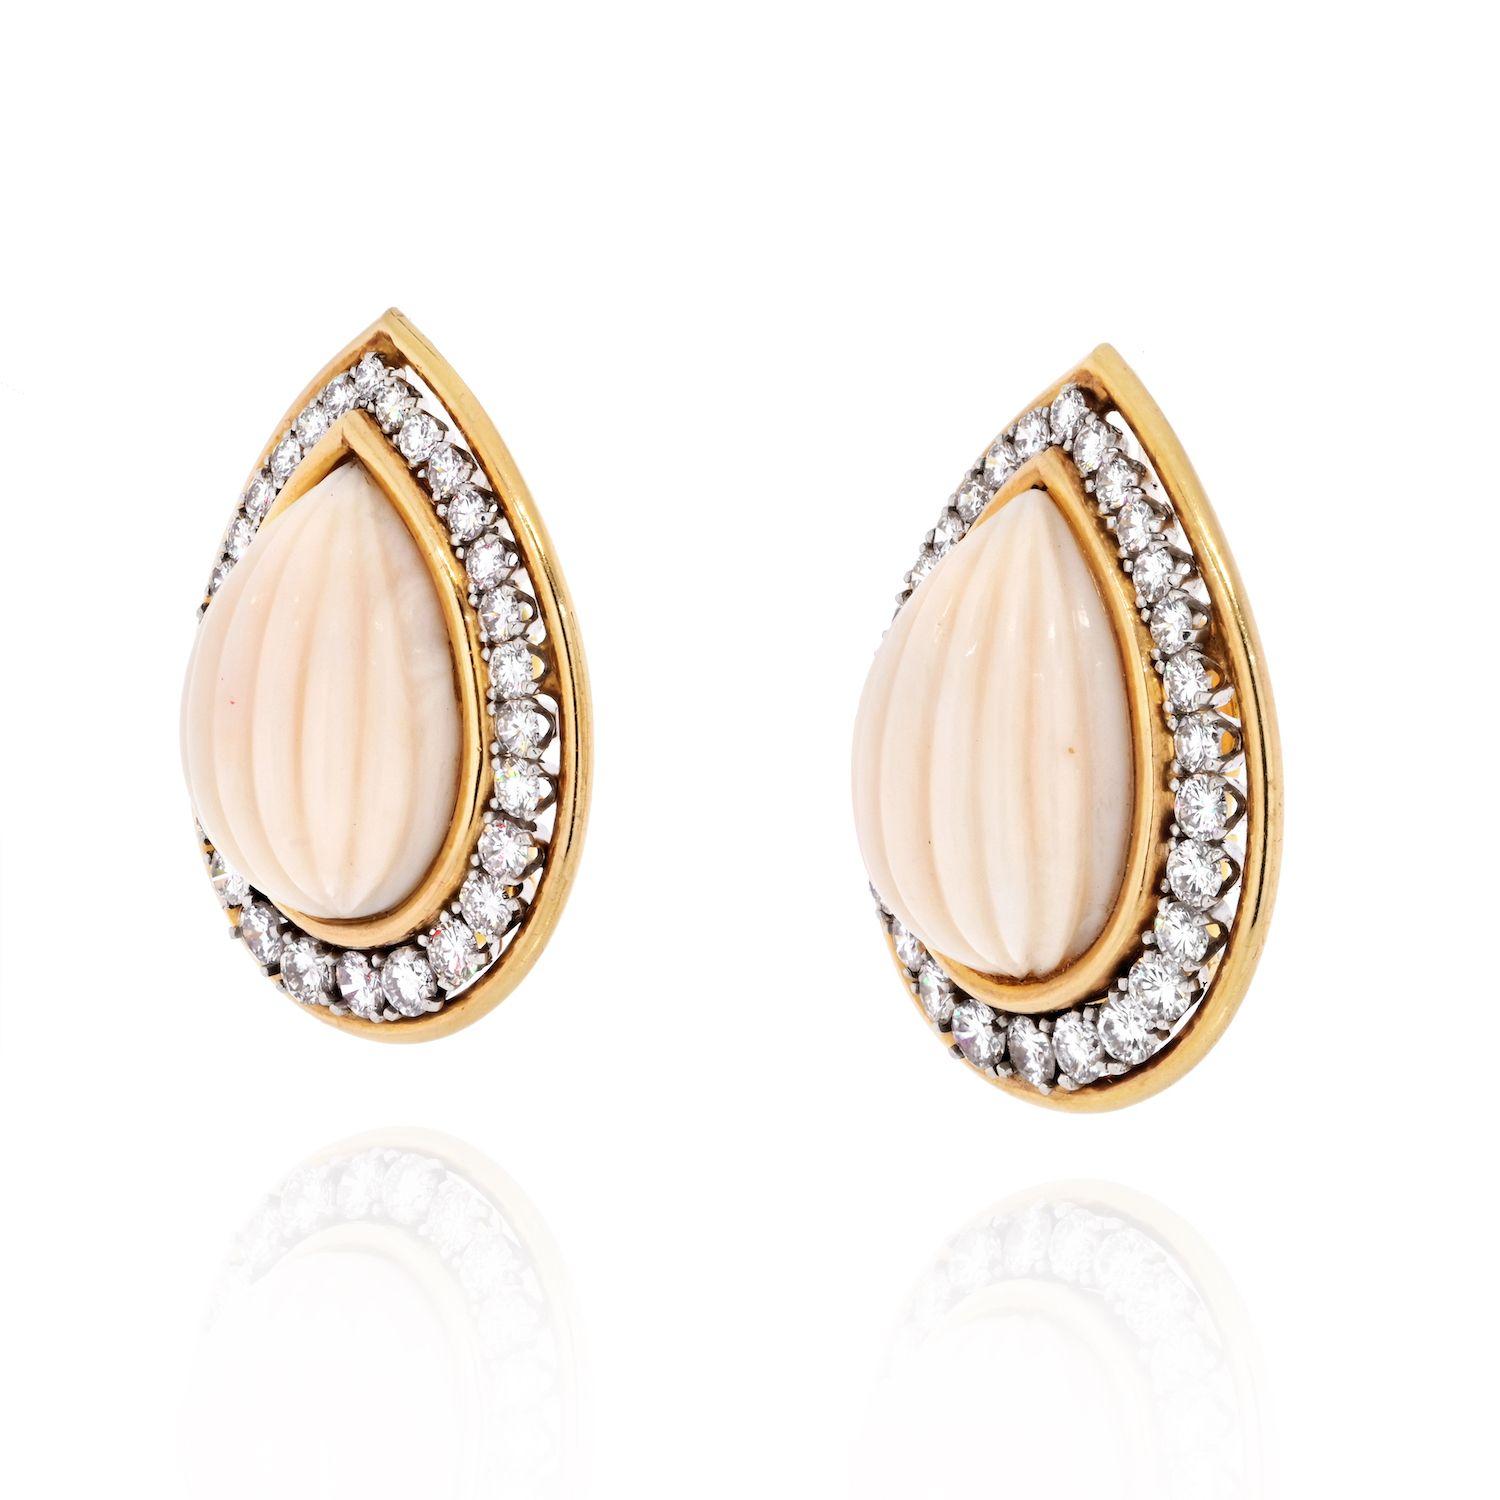 Light pink fluted coral earrings by David Webb. Impressive in size they measure about 1.1 inches in length these pear drop light pink coral earrings will complement someone with lighter skin tone and lighter short hair. The row of diamonds around